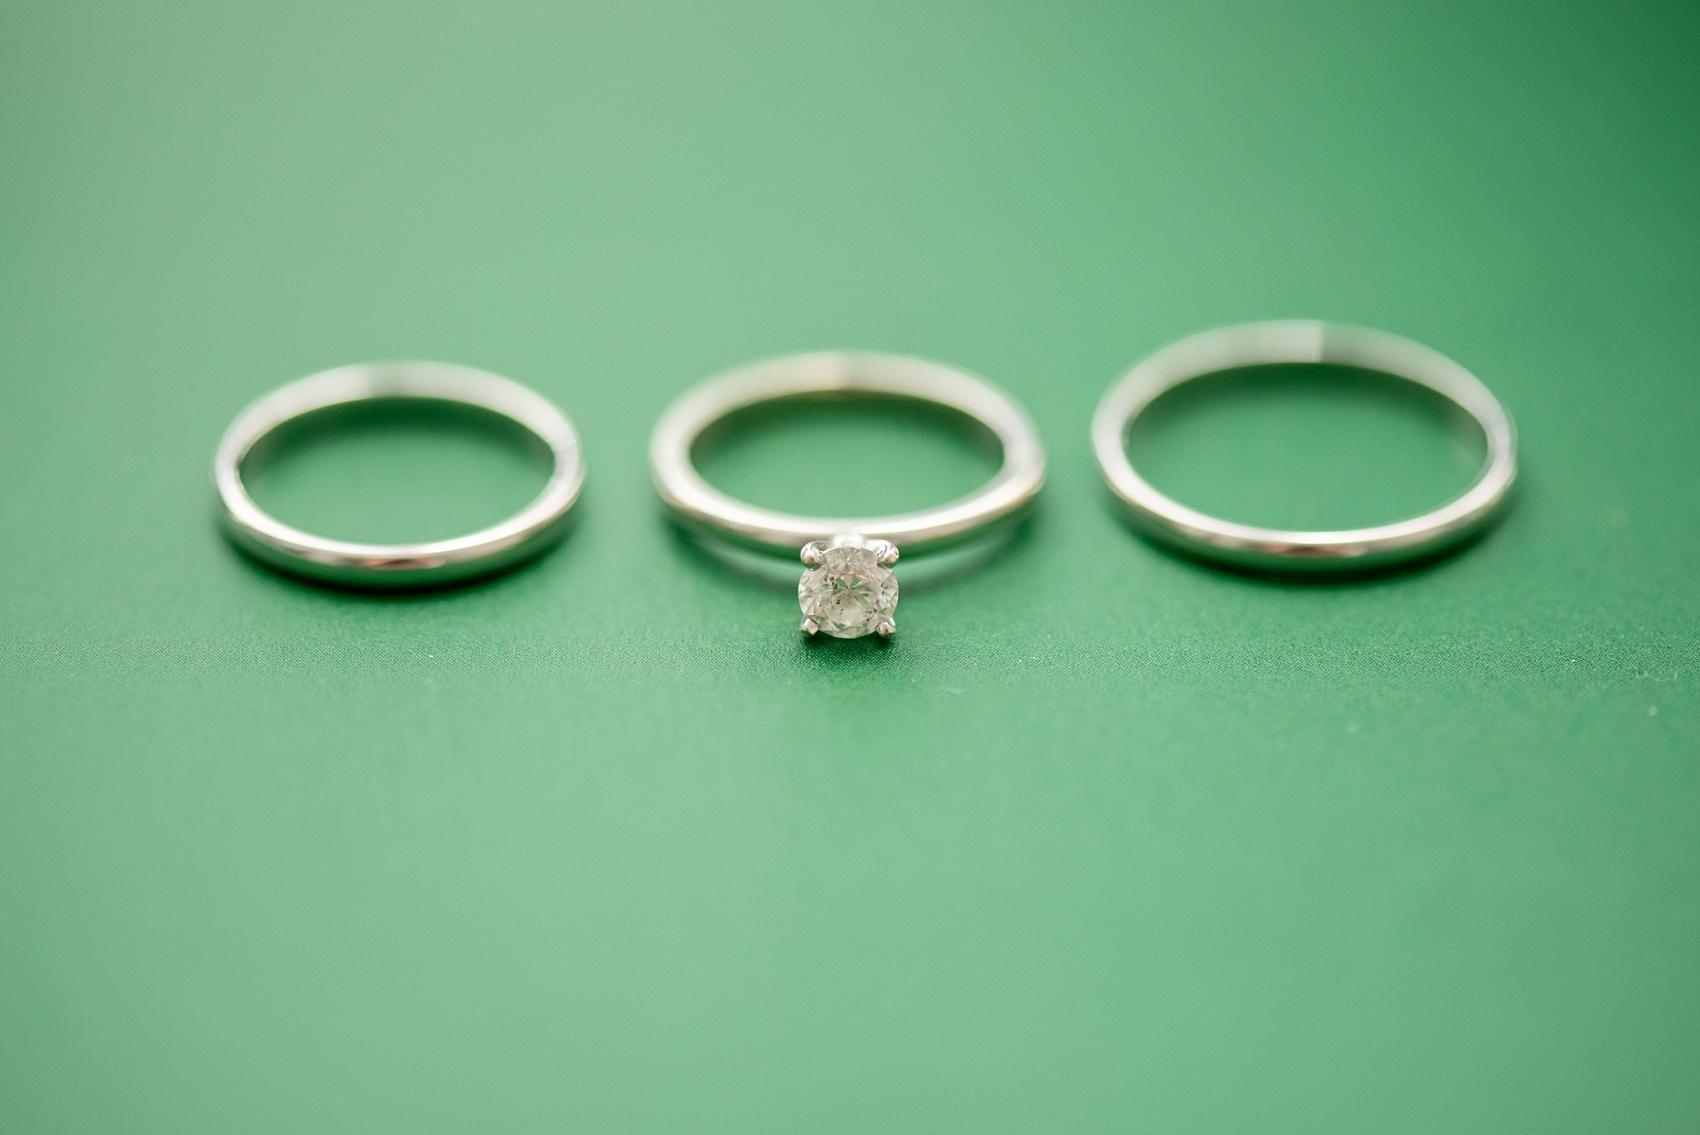 White gold wedding bands and solitaire diamond engagement ring on a green background at a Four Oaks Manor wedding in Atlanta. Images by Mikkel Paige Photography.